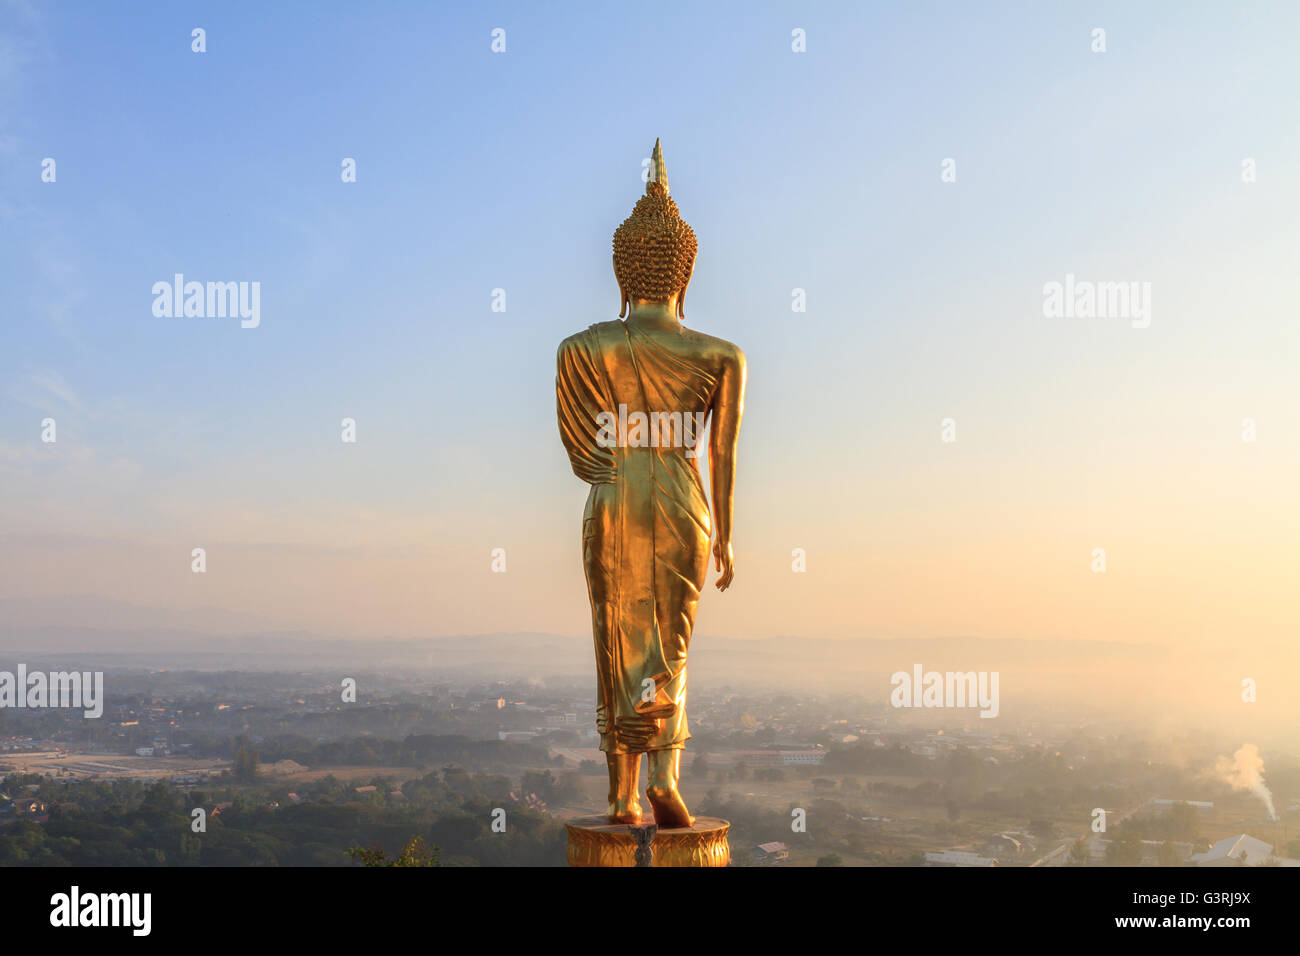 behind of golden buddha statue in sunrise time Stock Photo